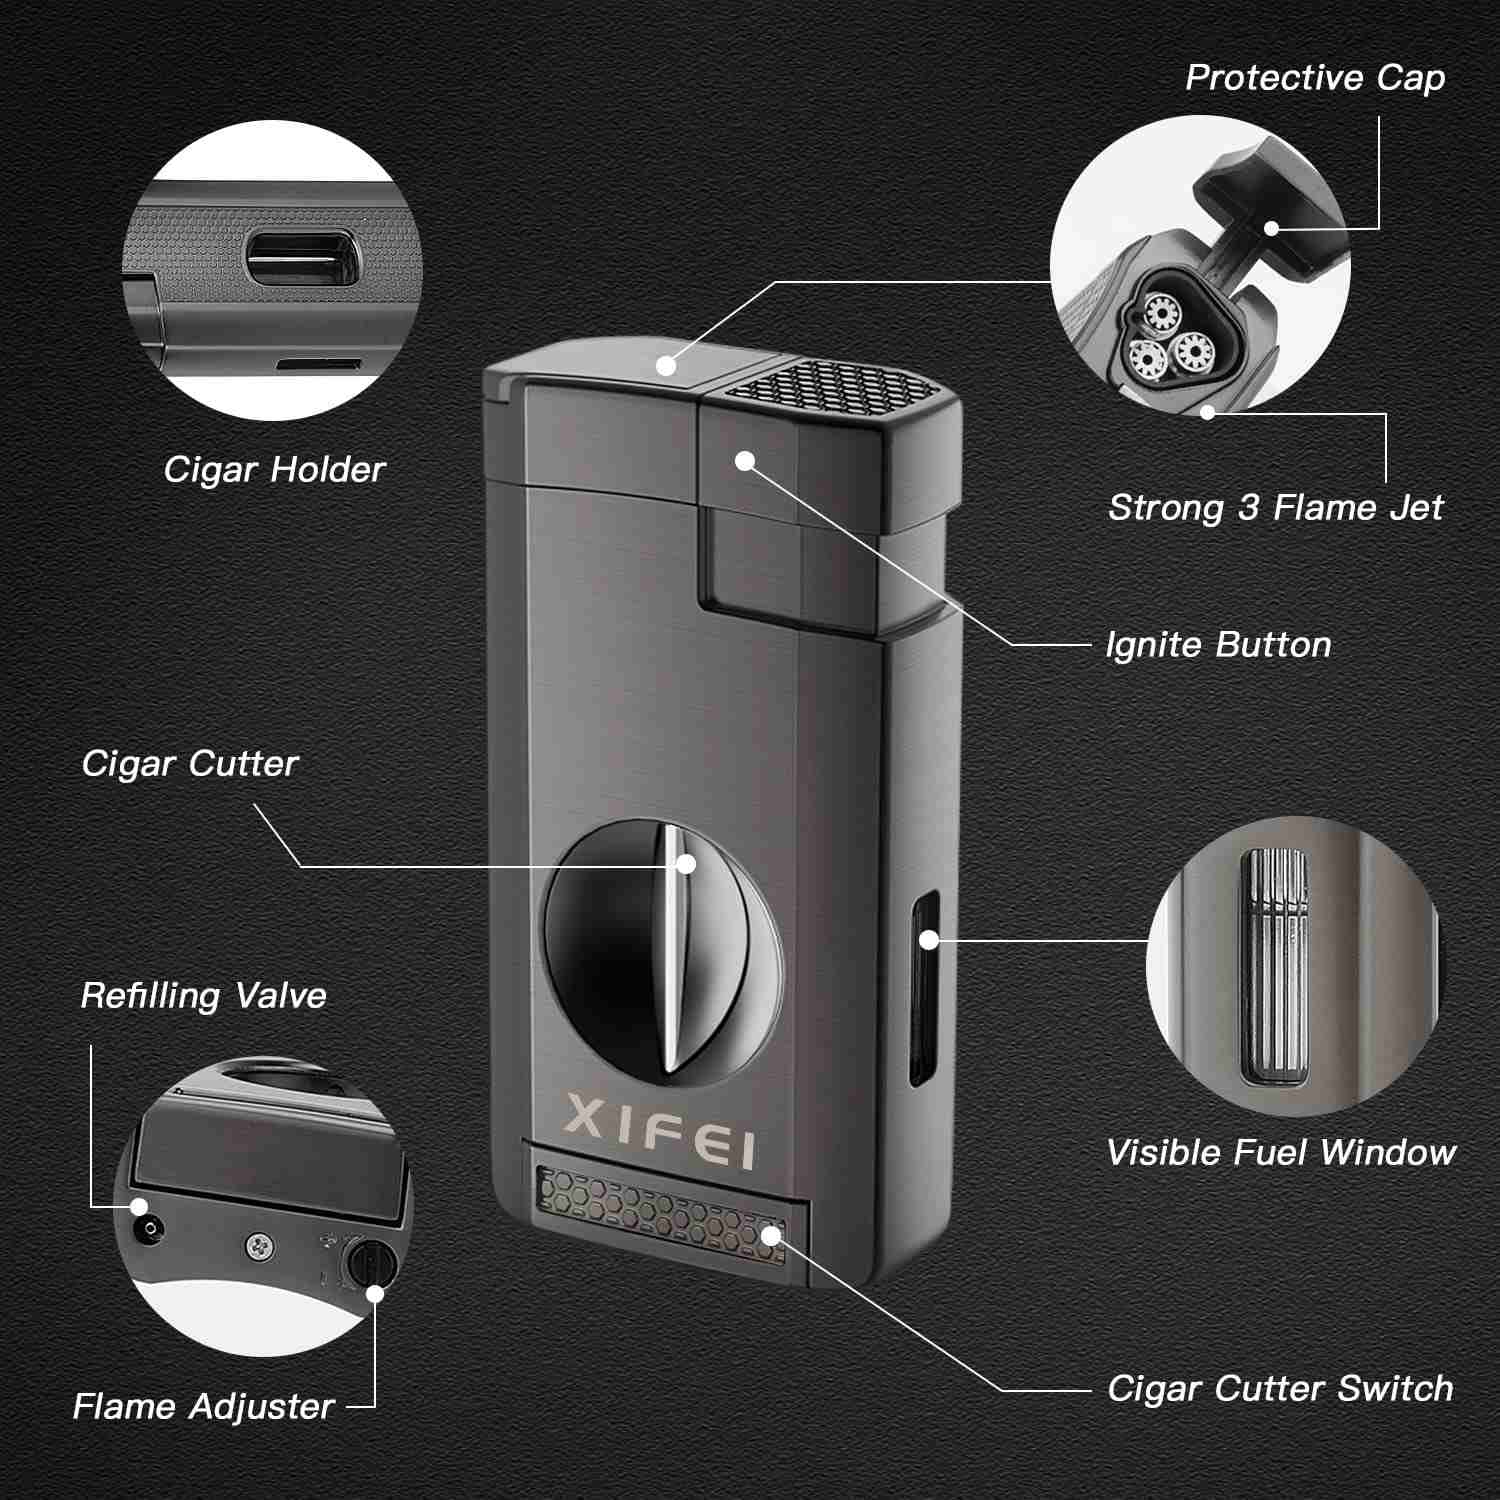 XIFEI TISFA Torch Lighter Triple Jet Flame with Cigar Punch, Refillabl